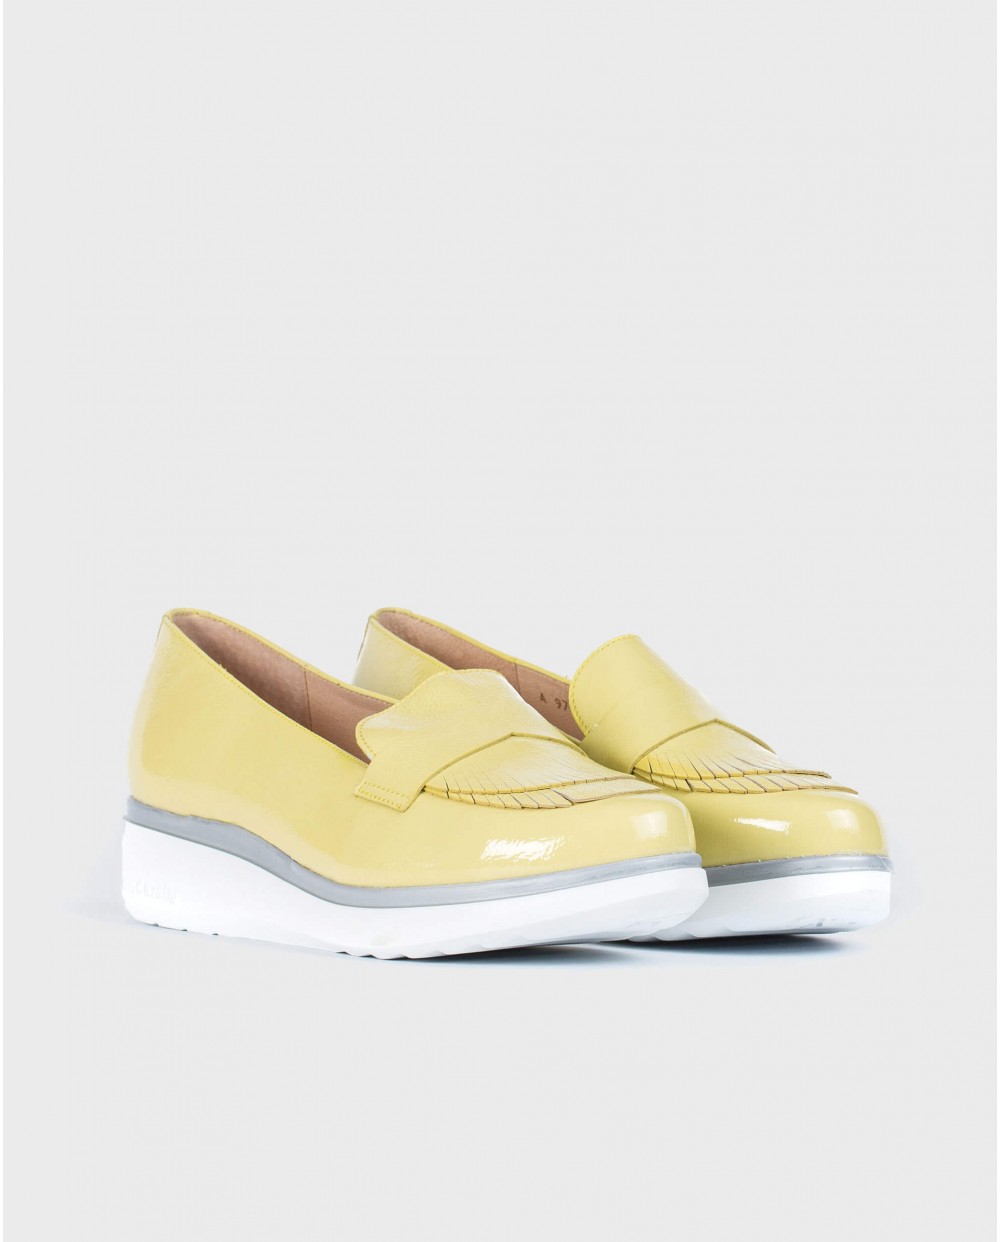 Patent leather moccasins with fringe detail